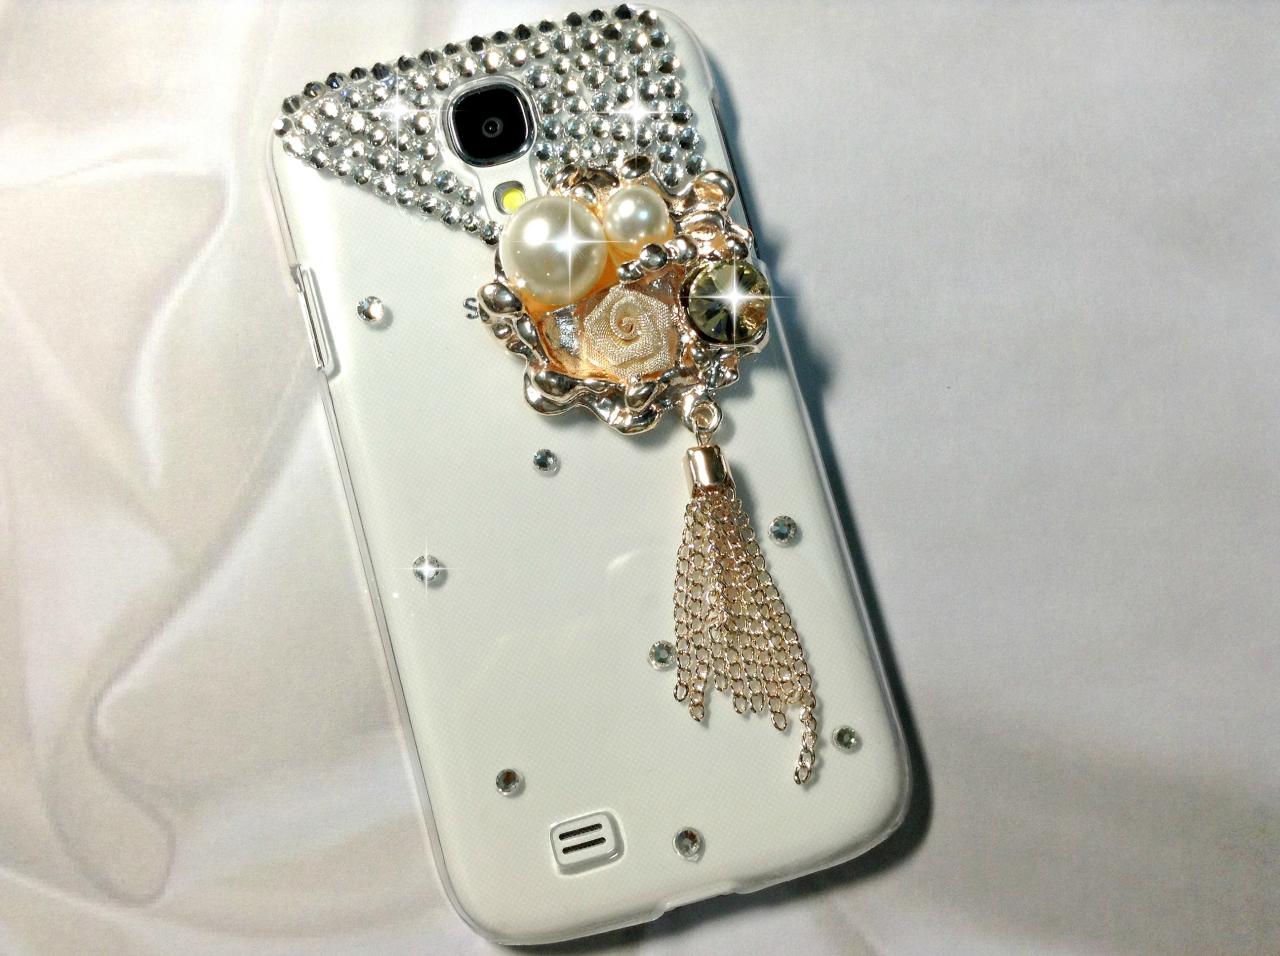 3d Handmade Deluxe Flower Crystal Design Case Cover For Samsung Galaxy S 4 S4 Iv Lte I9500 I9505